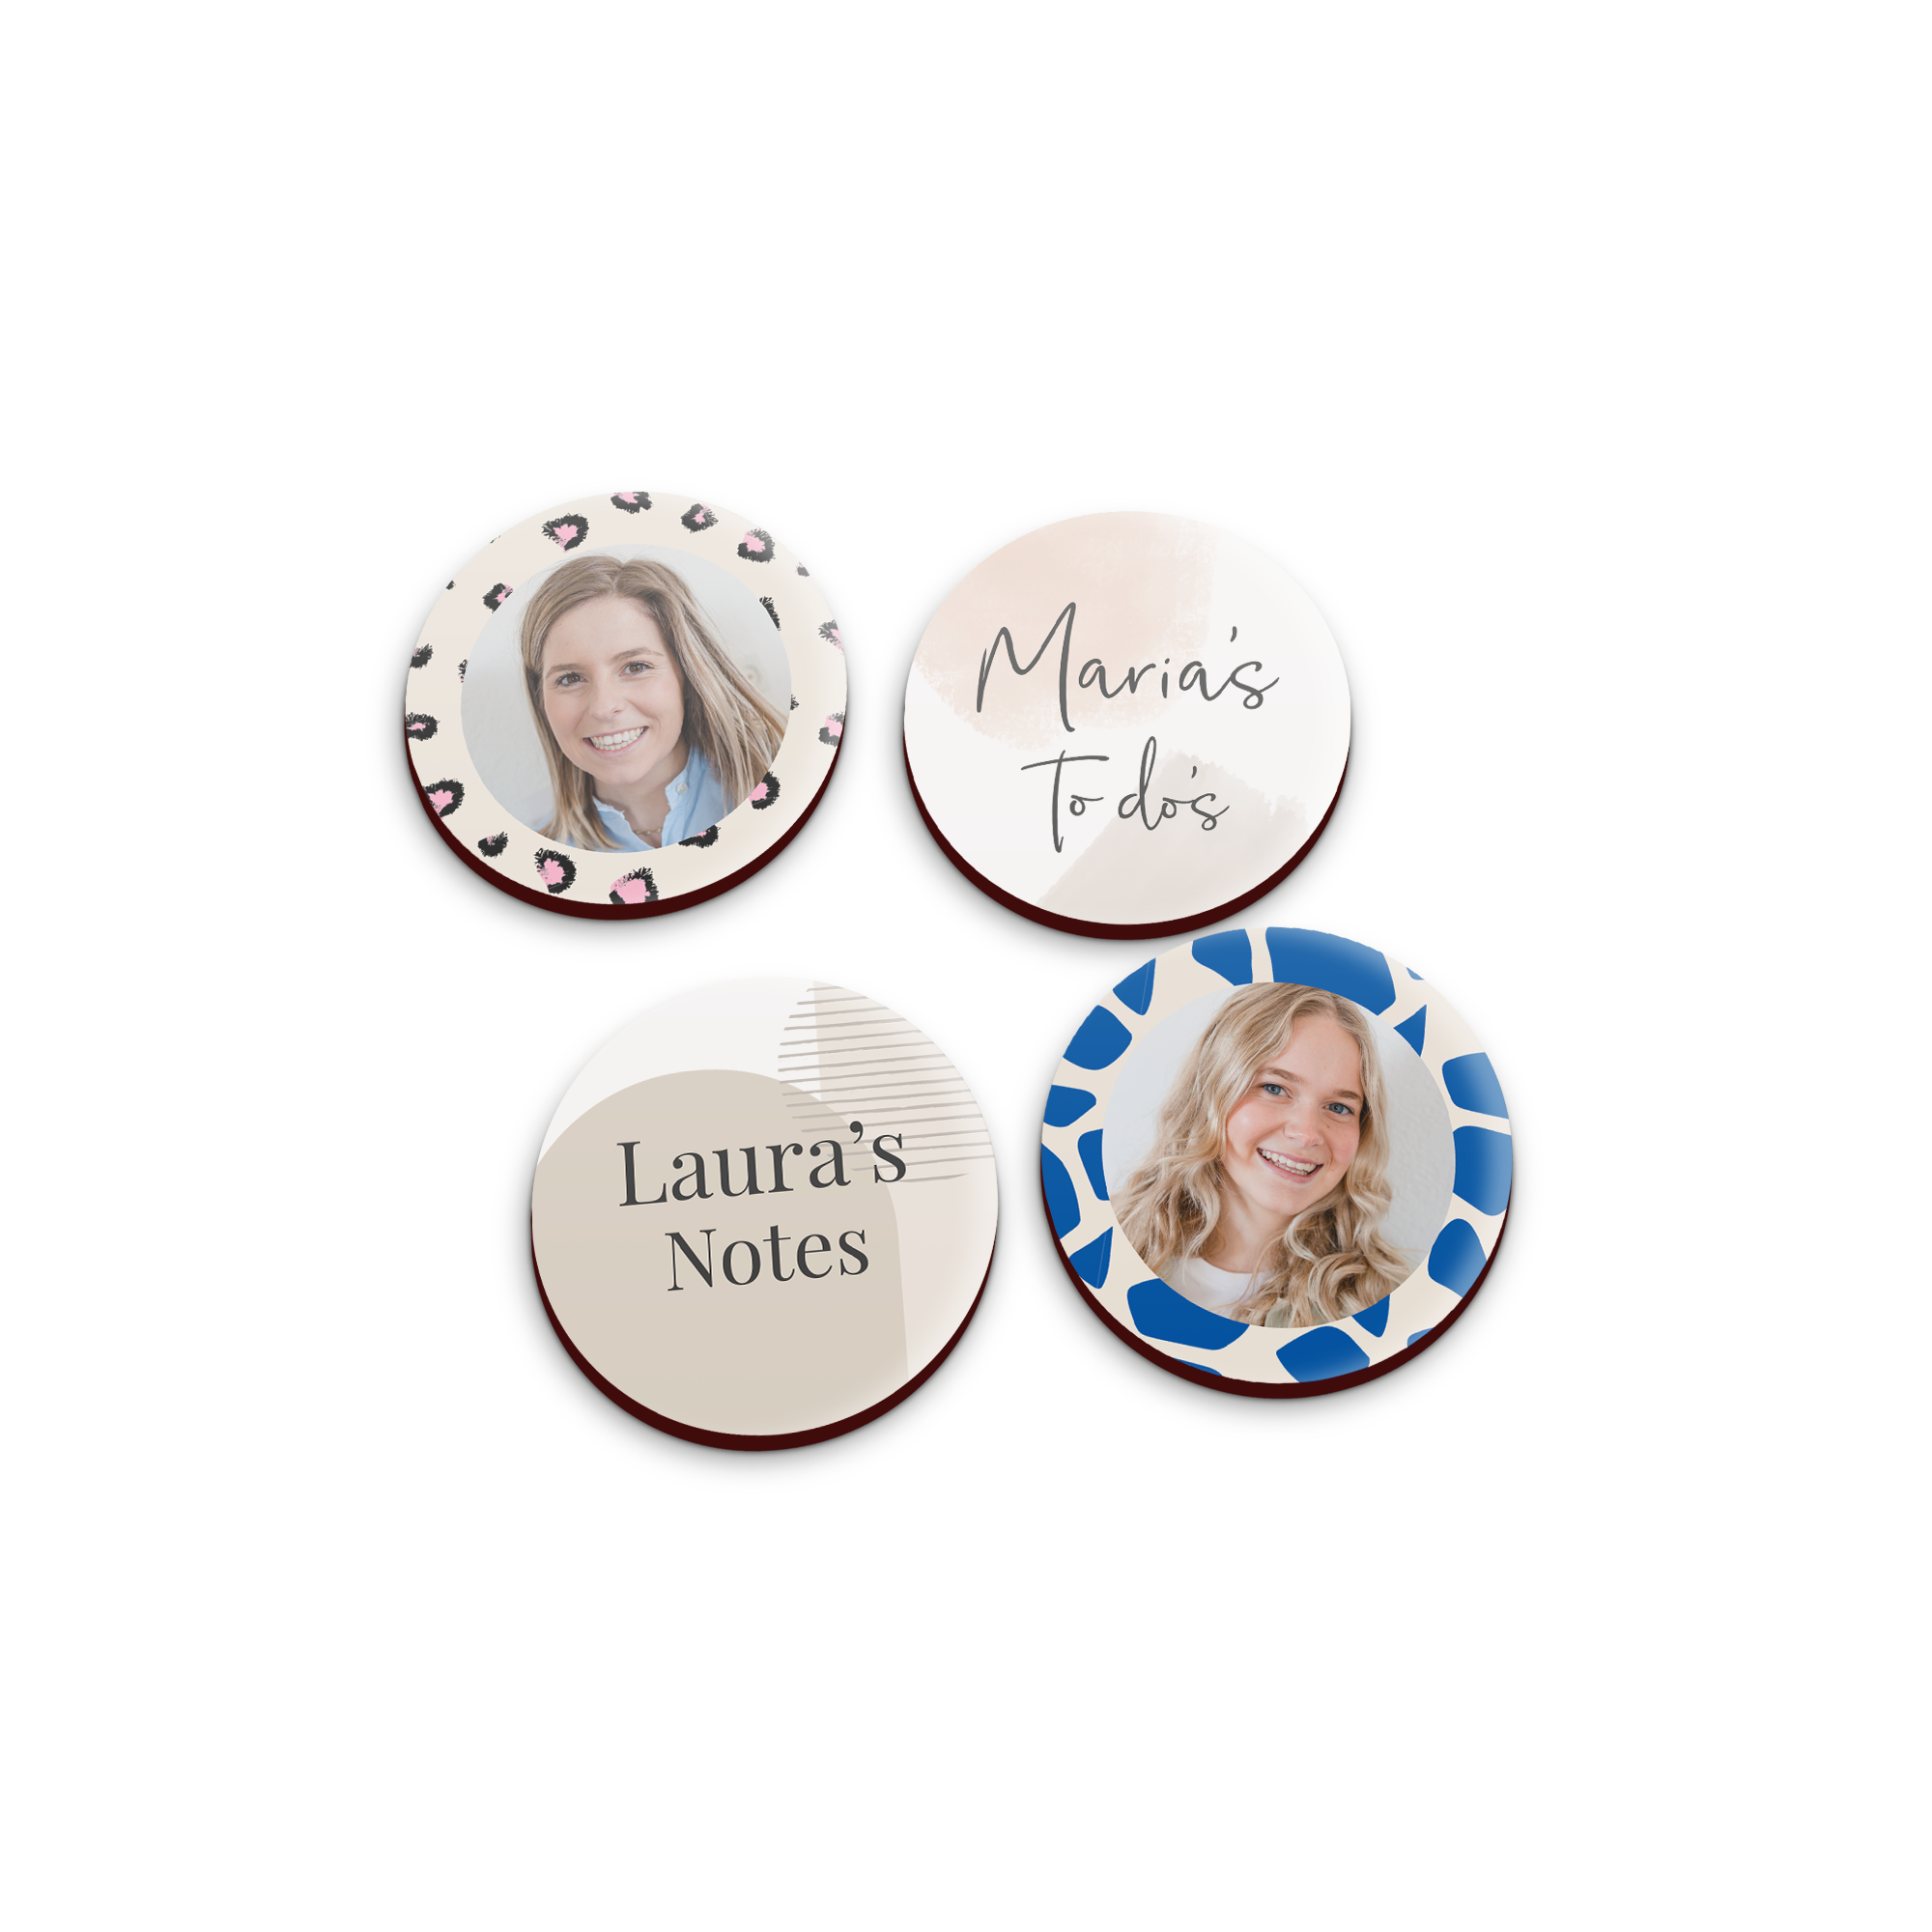 Personalised magnets - Round - 4 pcs